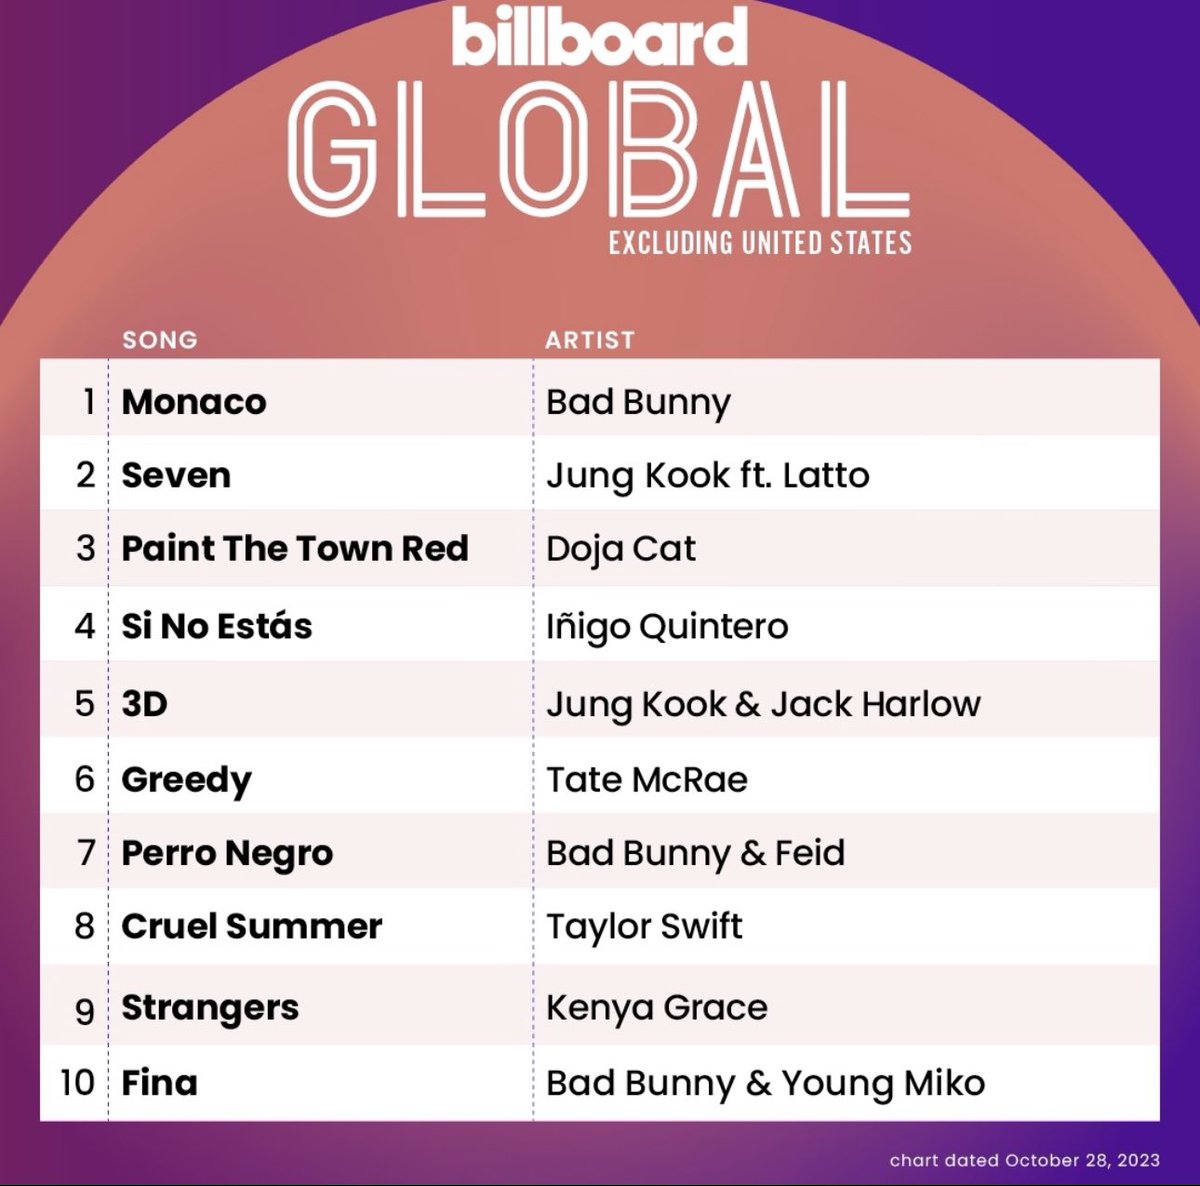 Jungkook's '3D' and 'Seven' remain in Top 10 of Billboard Global 200 and Top 5 Billboard Global Excl. US charts for another week!! • Global 200 – Top 10 #7 – Seven [14 weeks] #8 – 3D [3 weeks] • Global Excl. US – Top 5 #2 – Seven [14 weeks] #5 – 3D [3 weeks]